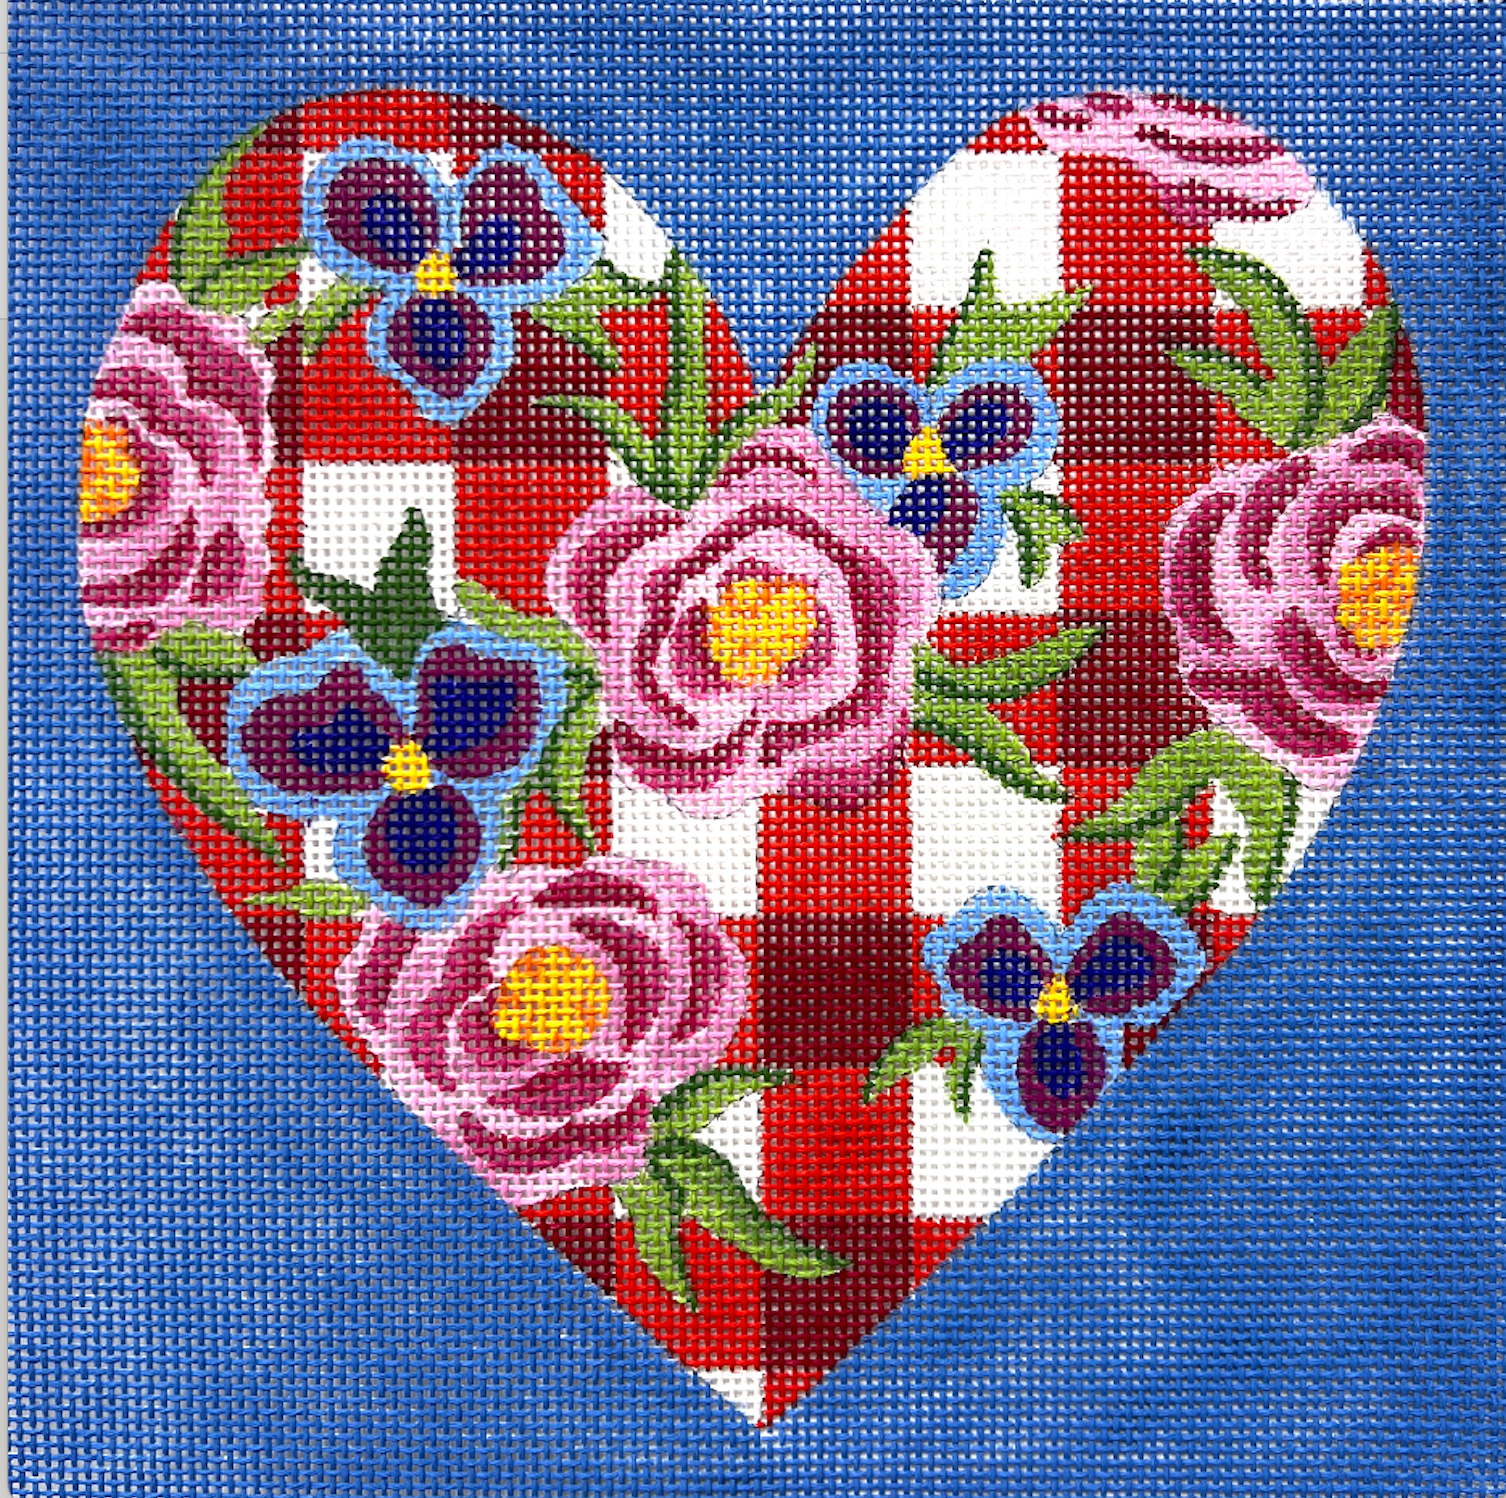 Alice Peterson AP4655 Red Gingham Floral Heart